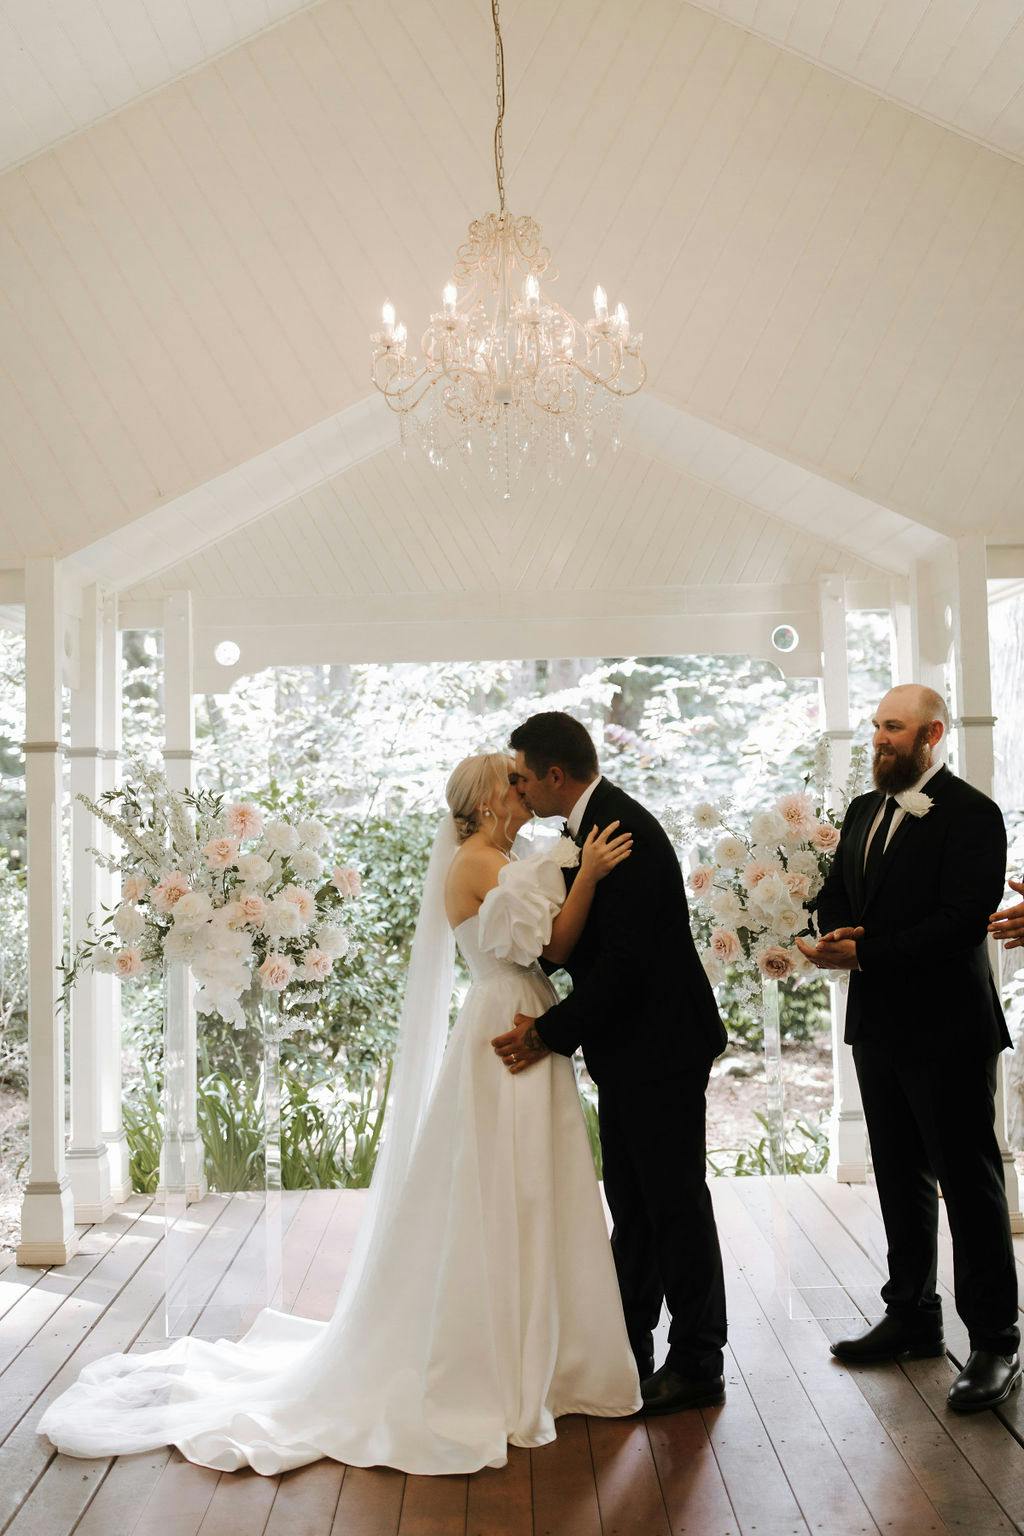 A couple sharing their first kiss at a wedding ceremony under a white pavilion with a chandelier hanging above. They are surrounded by elegant floral arrangements, and a person in a black suit and tie stands to the right, smiling.